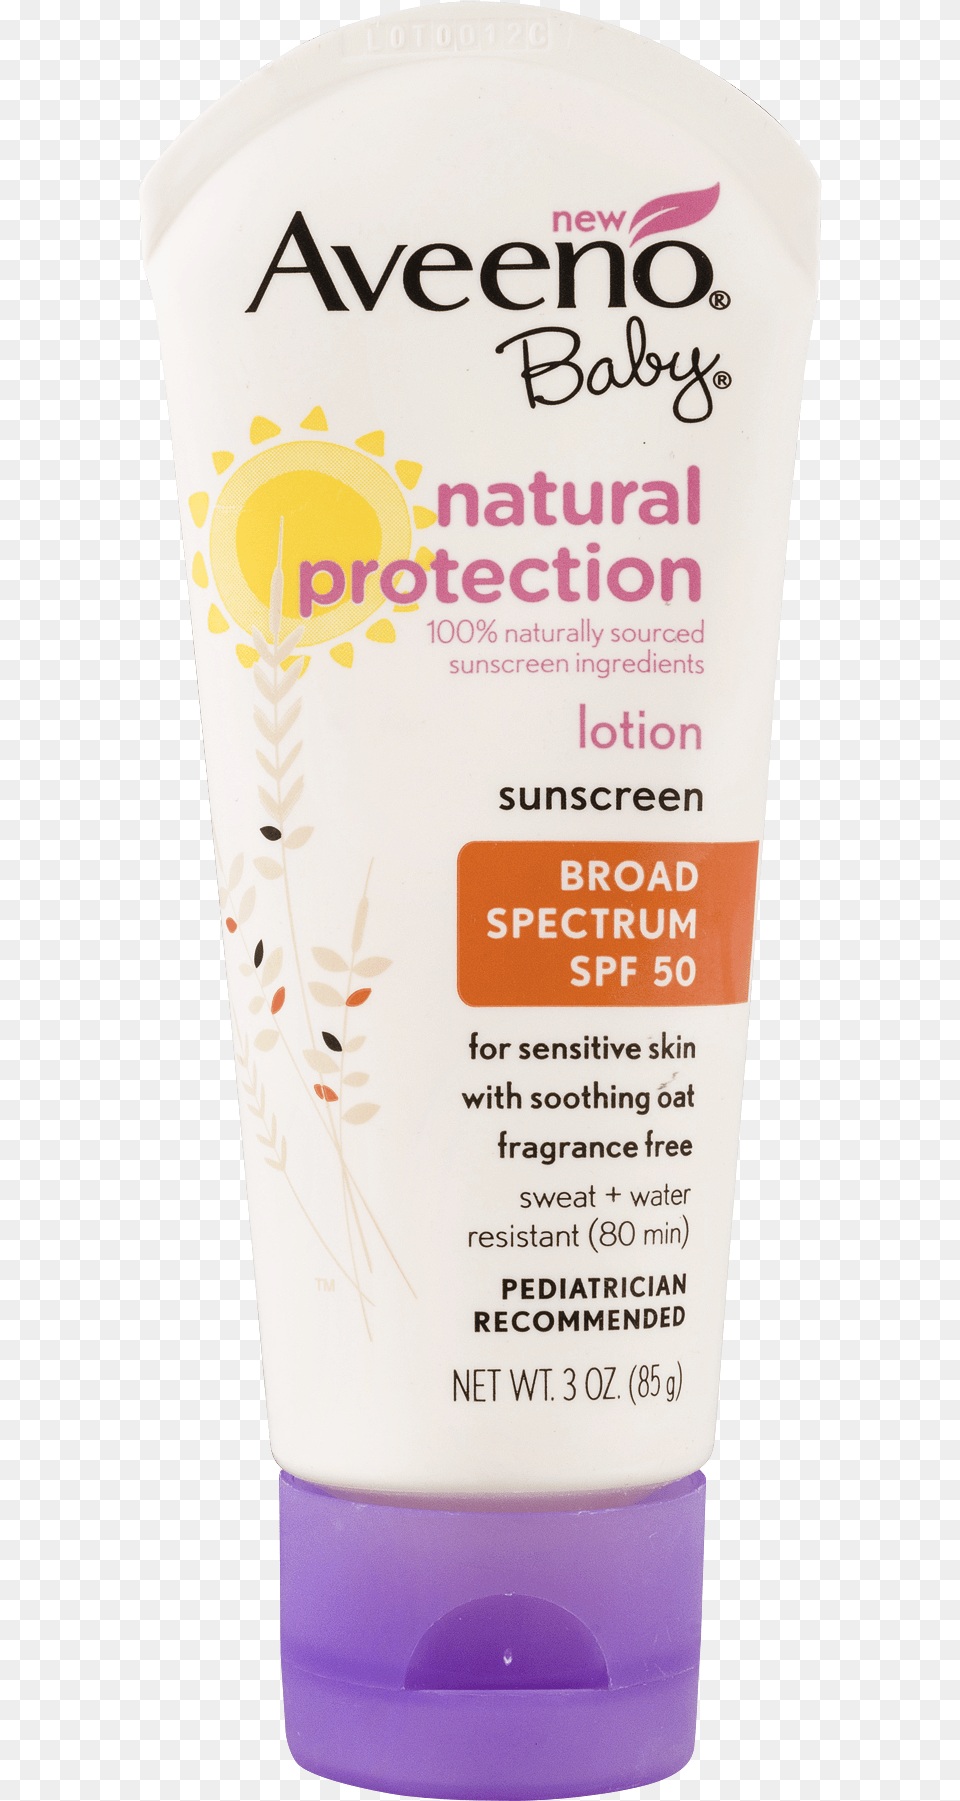 Aveeno Baby Natural Protection Sunscreen Lotion Broad Aveeno Baby Natural Protection Sunscreen Lotion Spf, Bottle, Cosmetics, Can, Tin Png